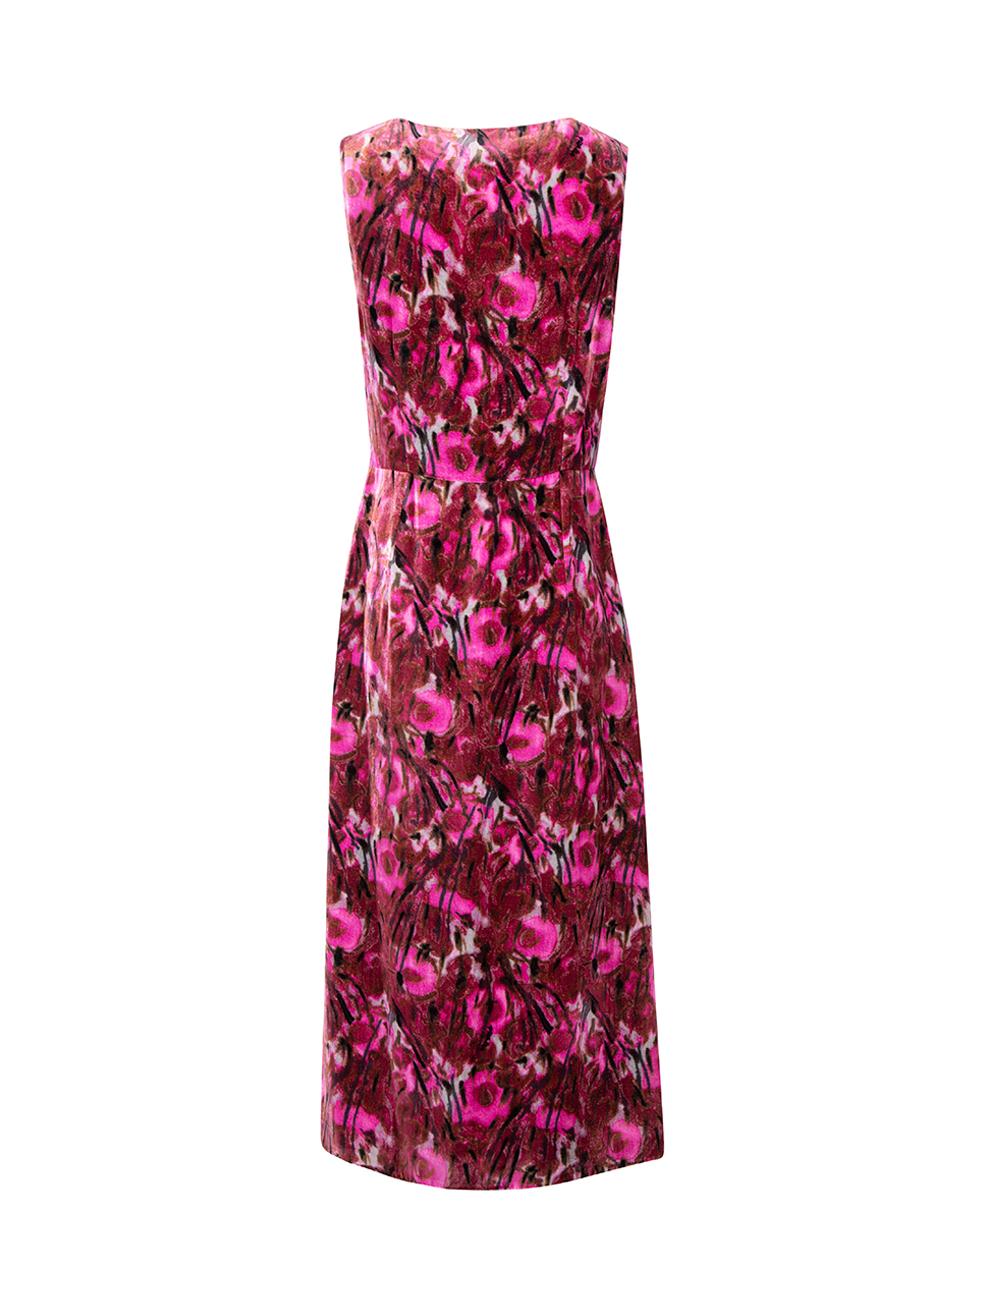 CONDITION is Very good. Hardly any visible wear to dress is evident on this used Prada designer resale item. Details Multicolour- Pink and purple tone Velvet Midi dress Abstract pattern V neckline Side zip closure with hook and eye Fully lined Made